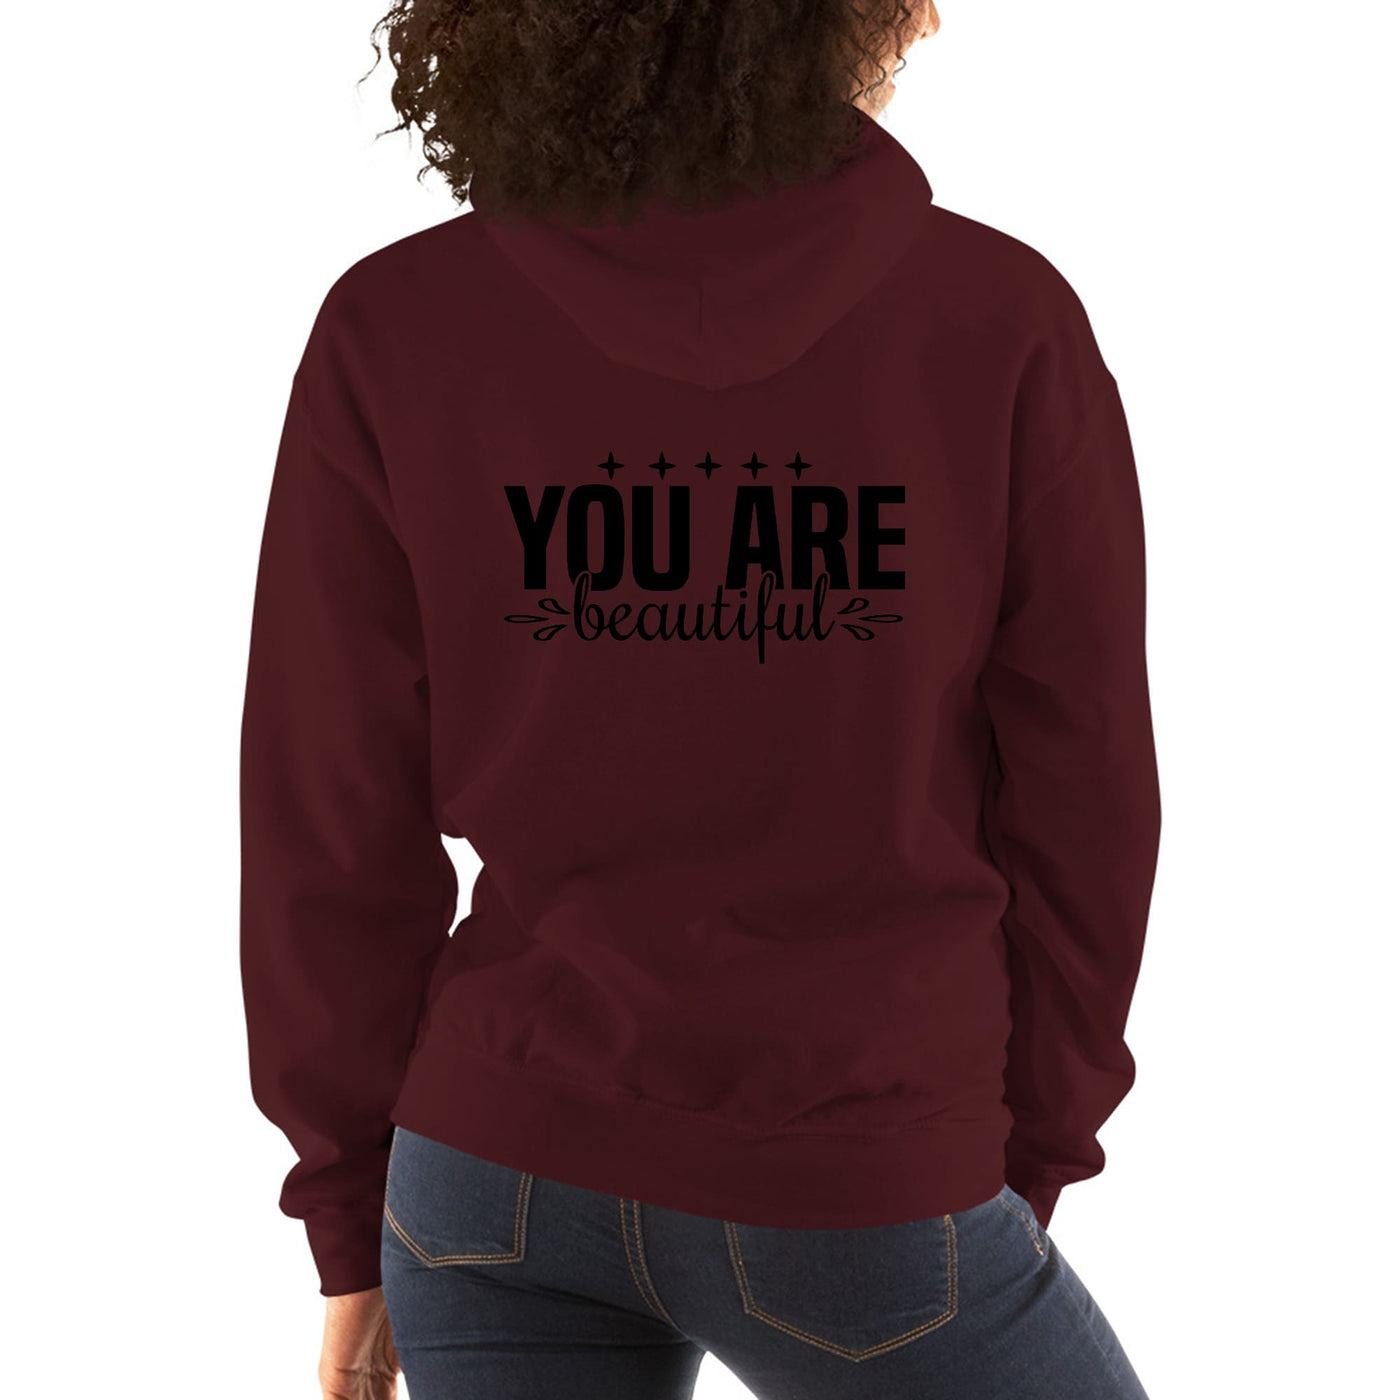 Womens Graphic Hoodie You Are Beautiful - Inspiration Affirmation, | Hoodies